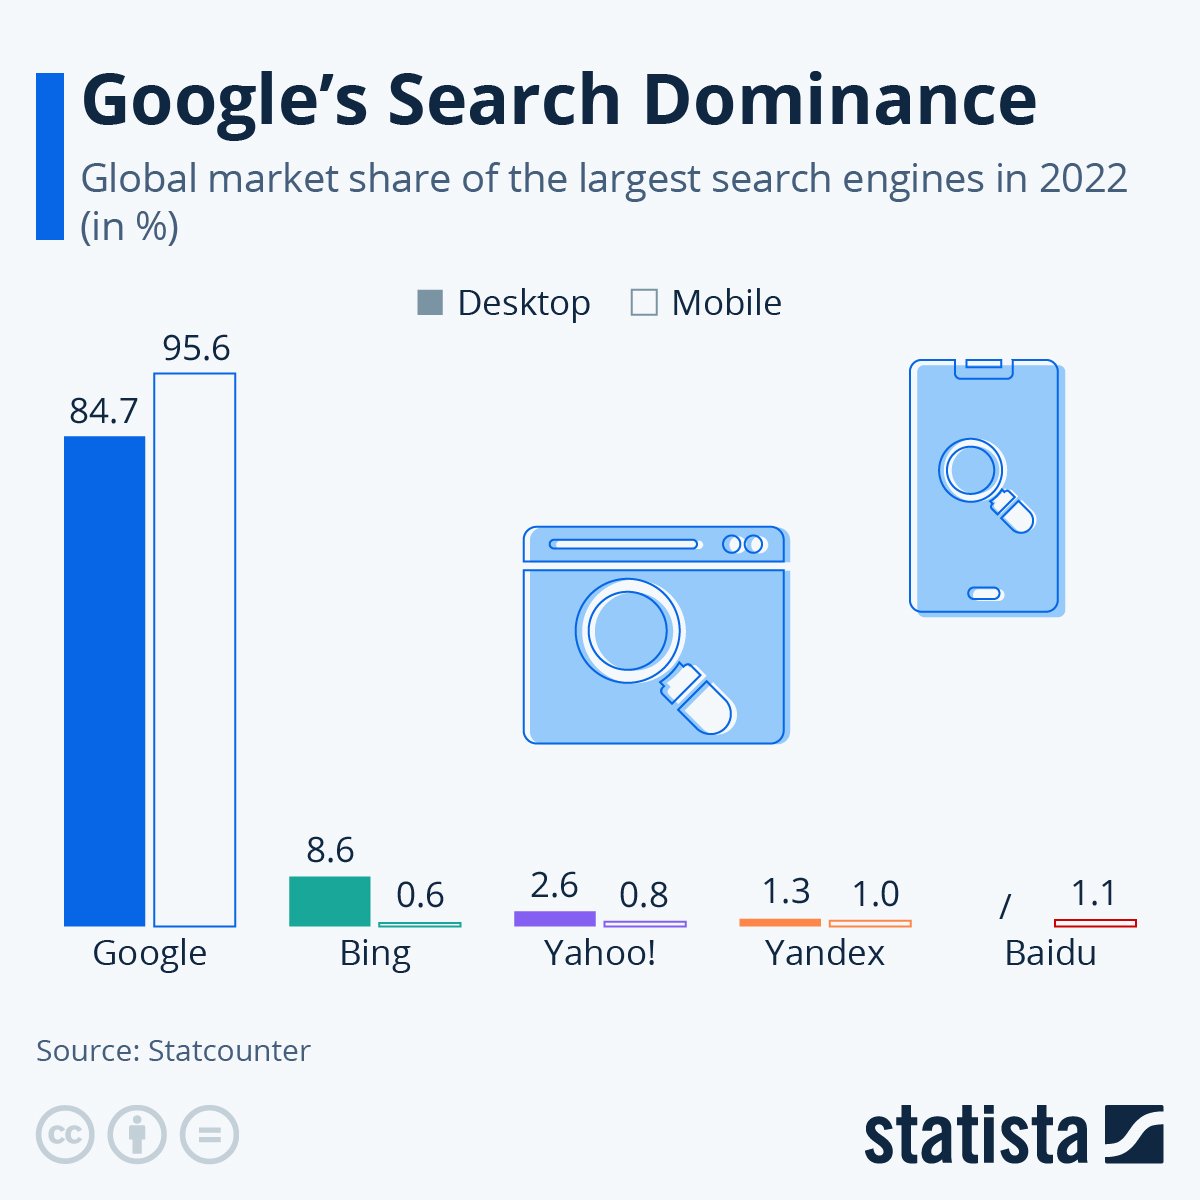 Google's search dominance globally in 2022